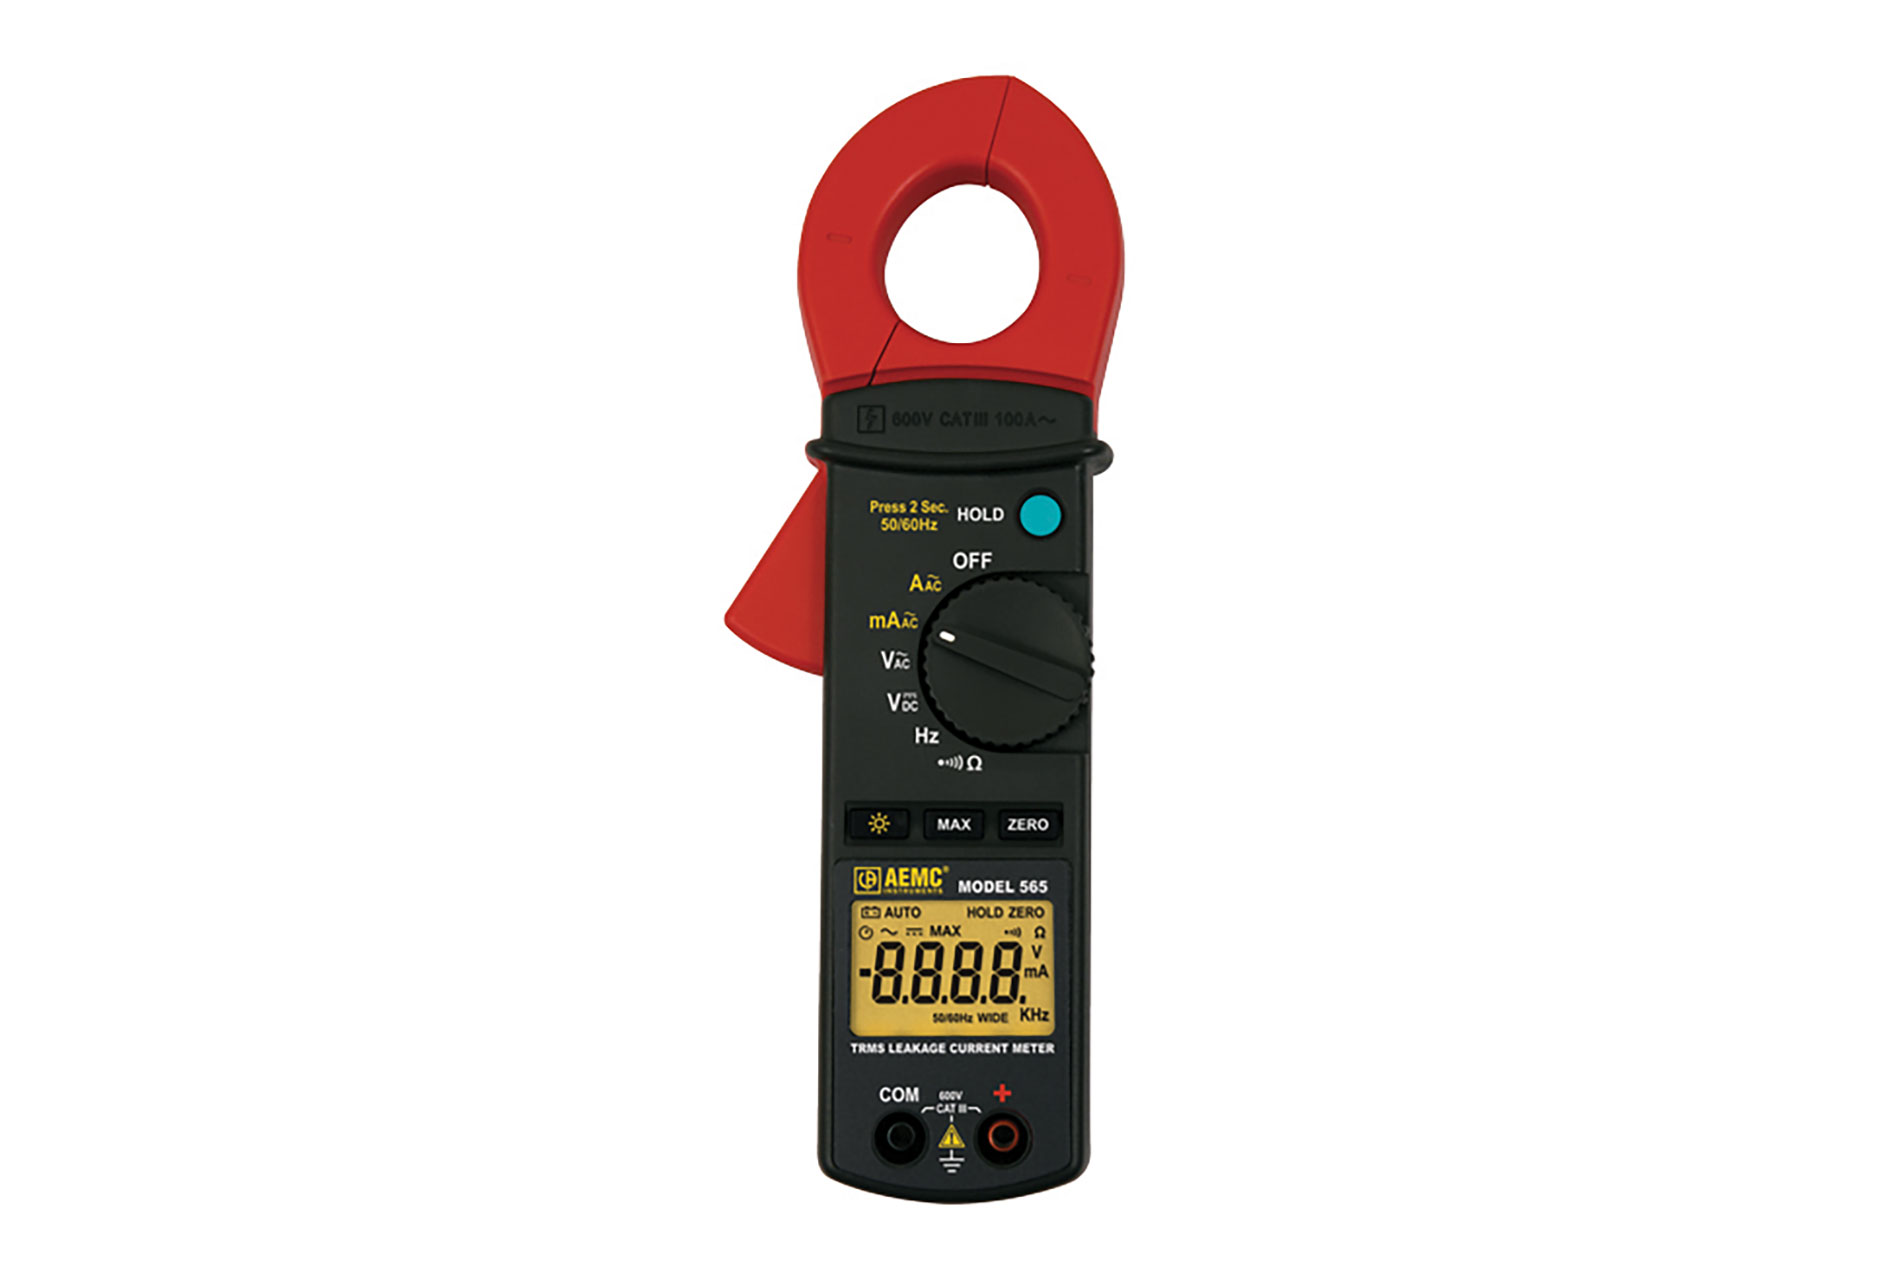 AEMC Instruments’ 565 clamp-on leakage current meter